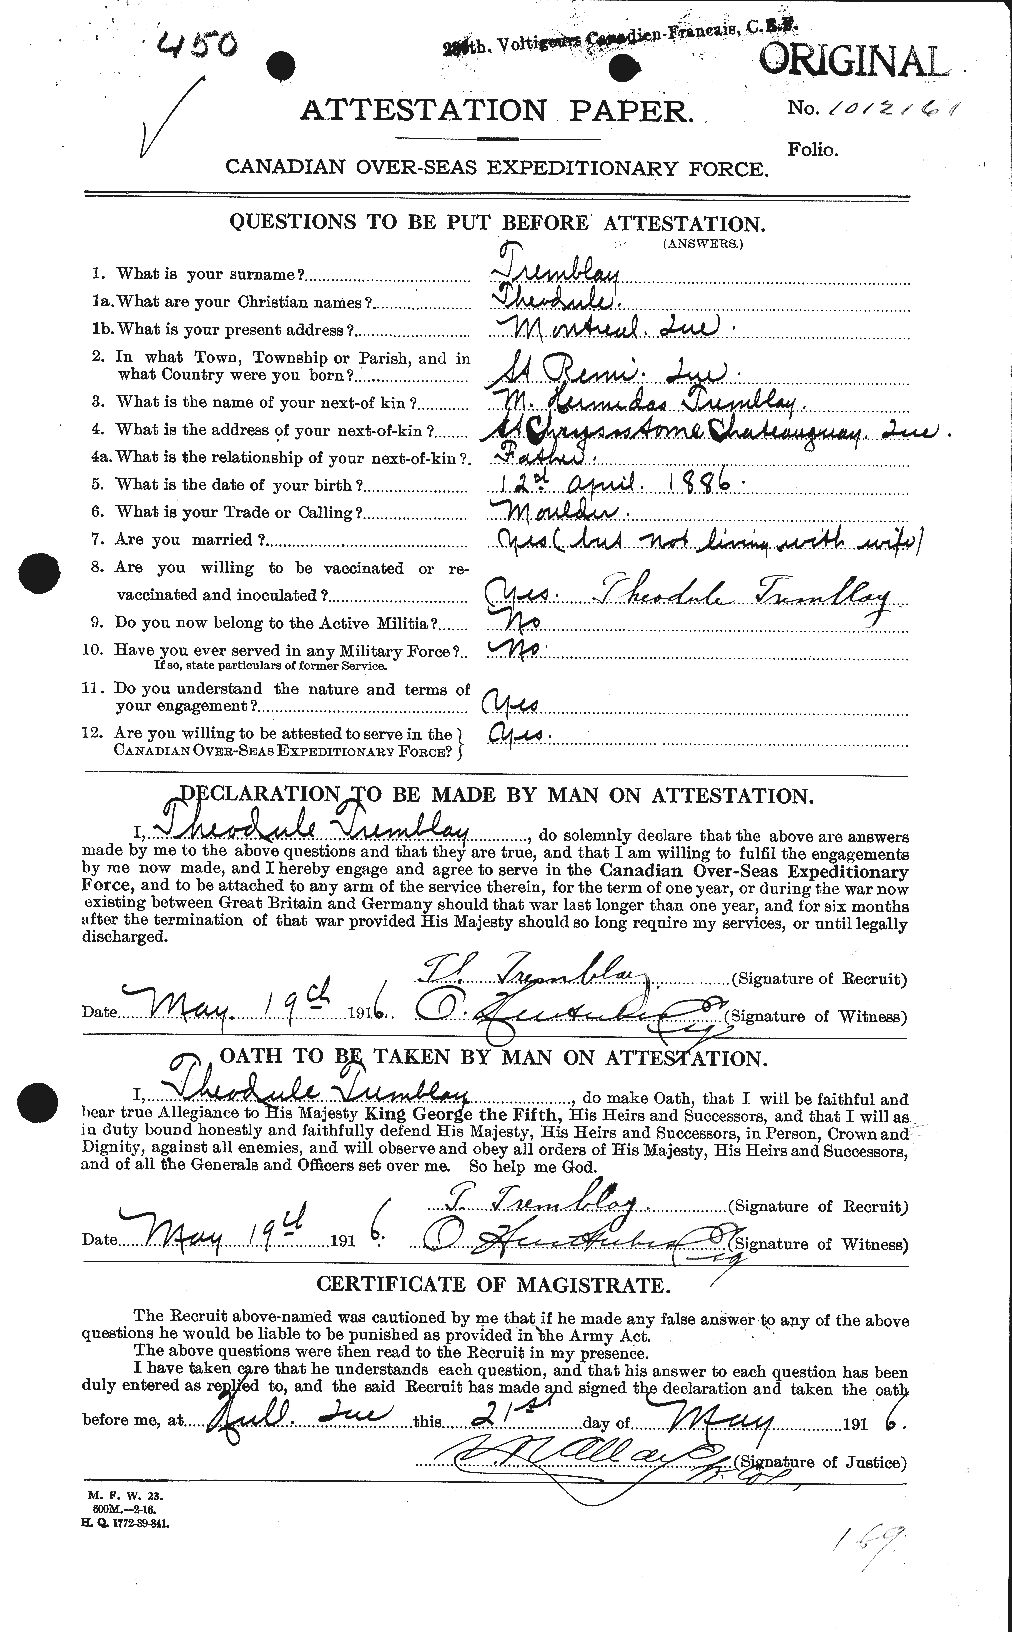 Personnel Records of the First World War - CEF 638314a